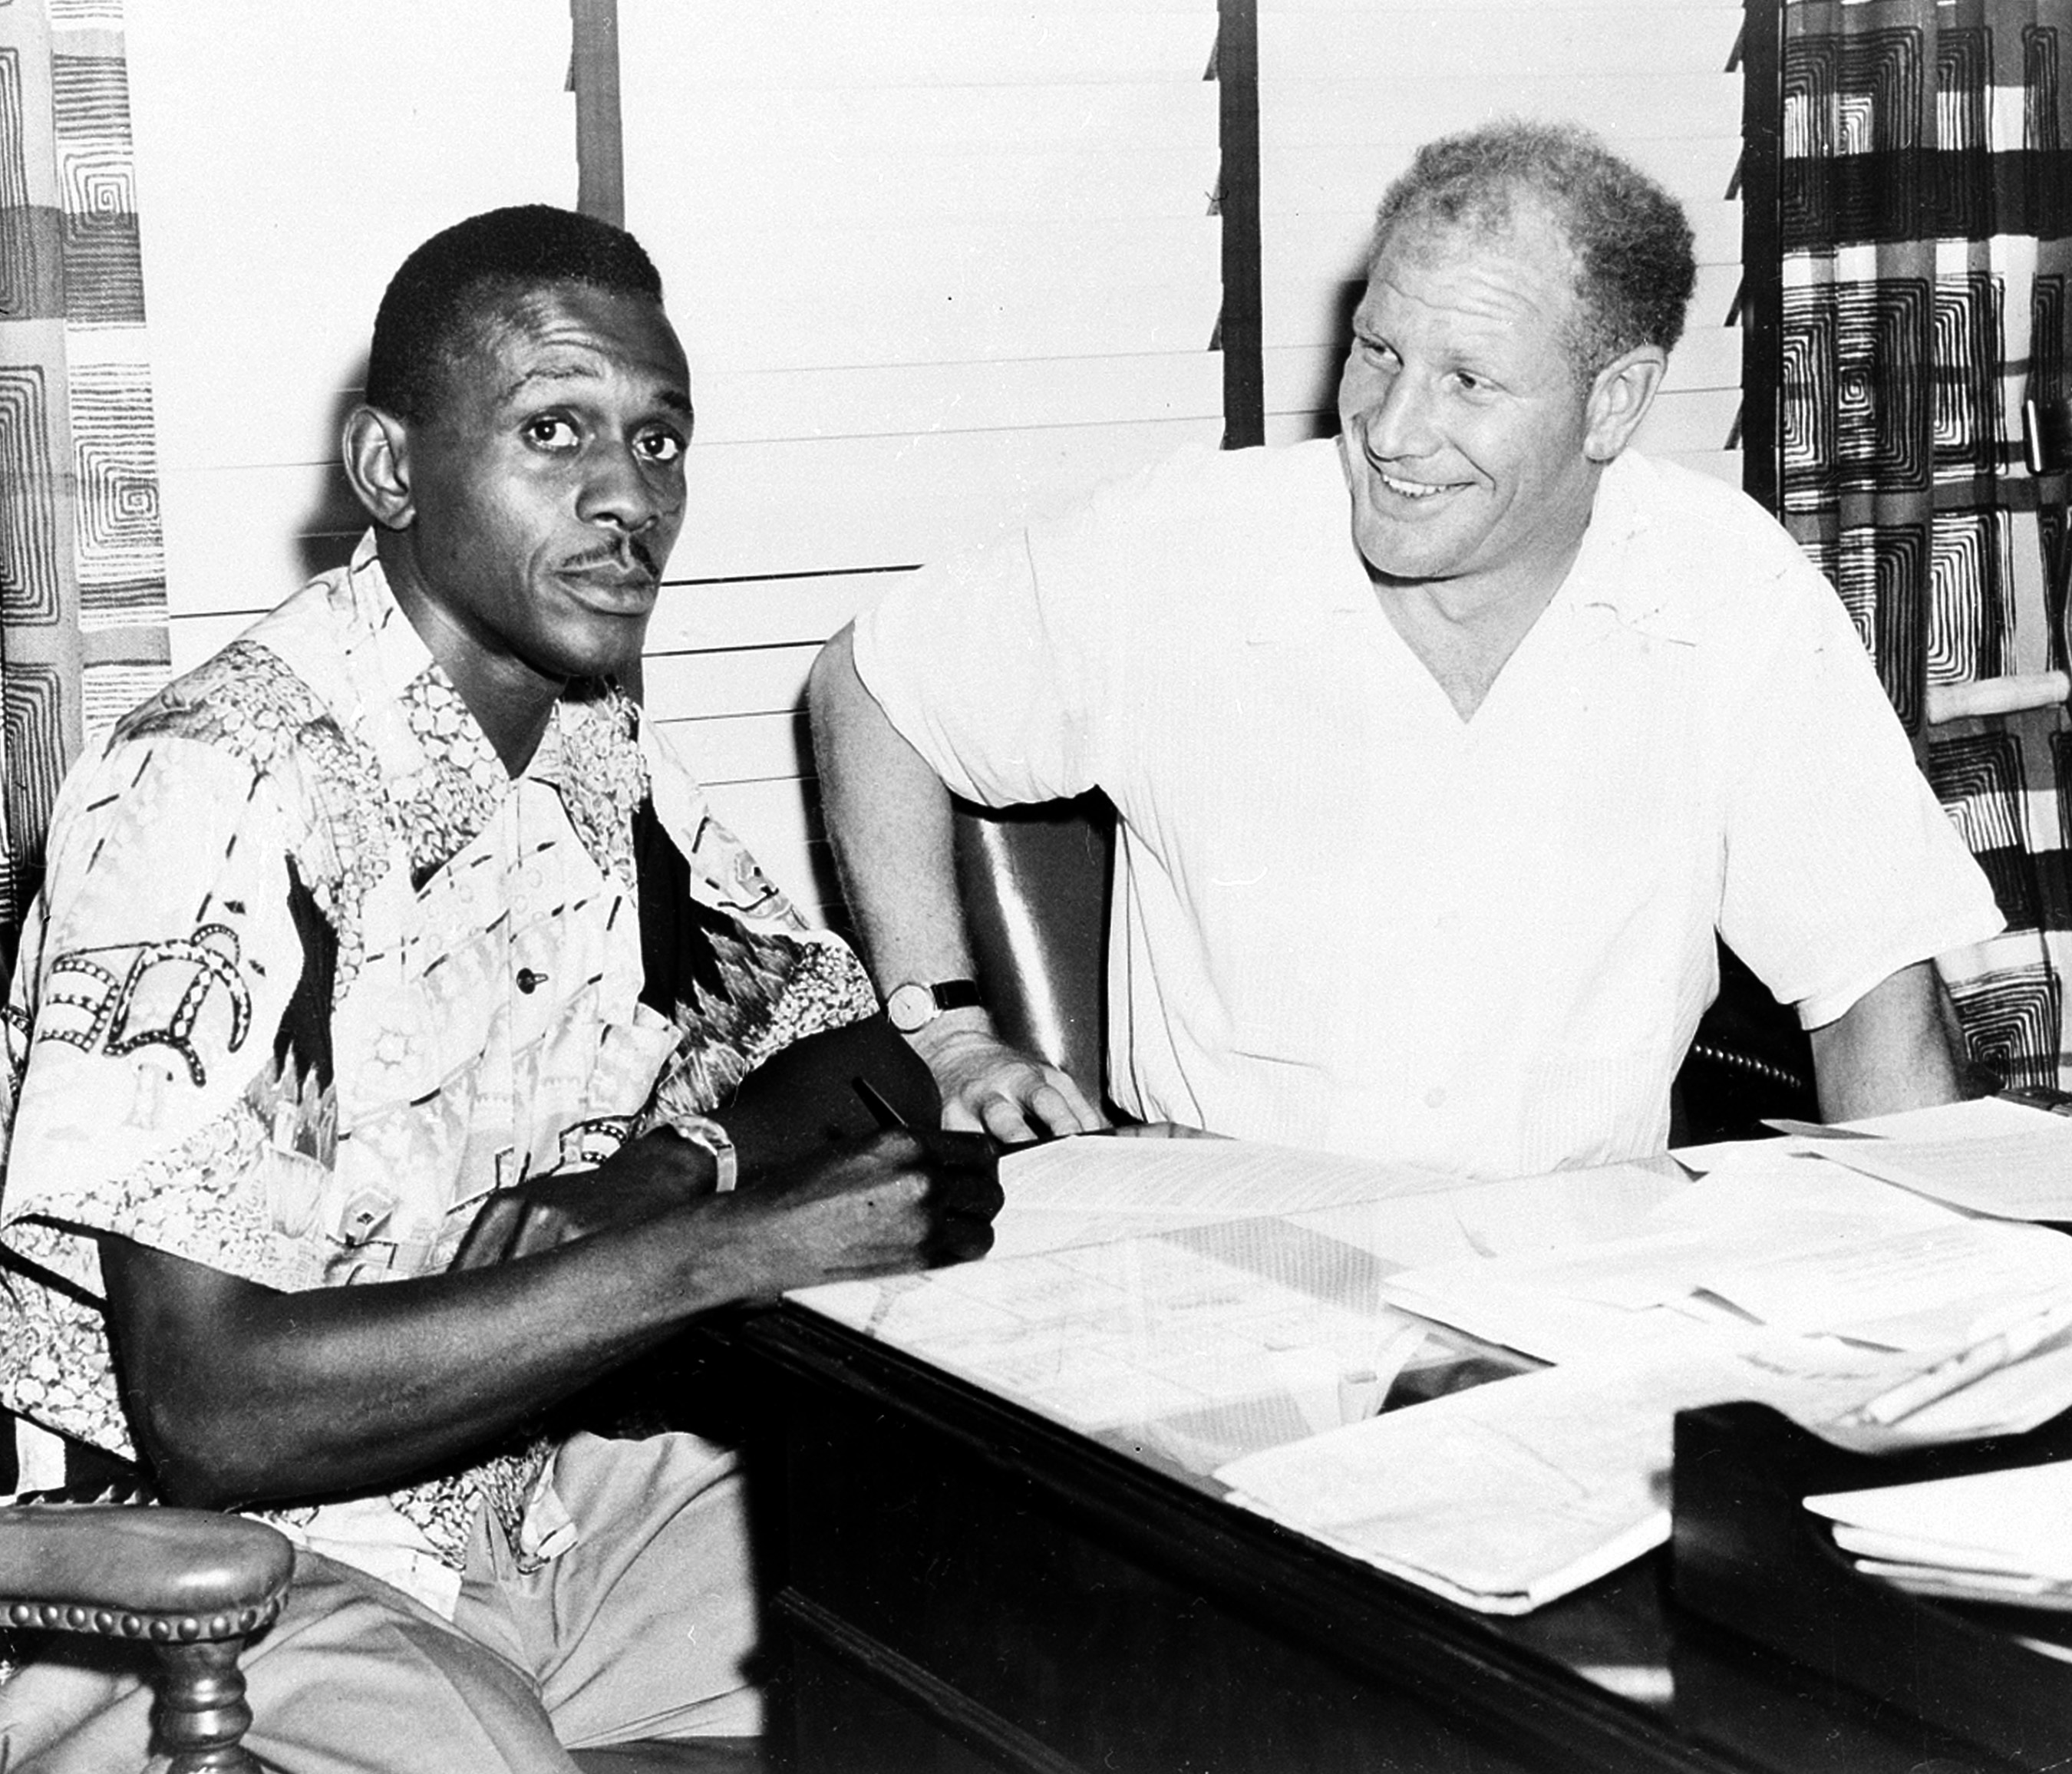 Pitcher Satchel Paige signs the contract for his return to major league baseball, starting for the Browns, in St. Louis, on July 18, 1951. Next to him is Bill Veeck, the new owner of the team.